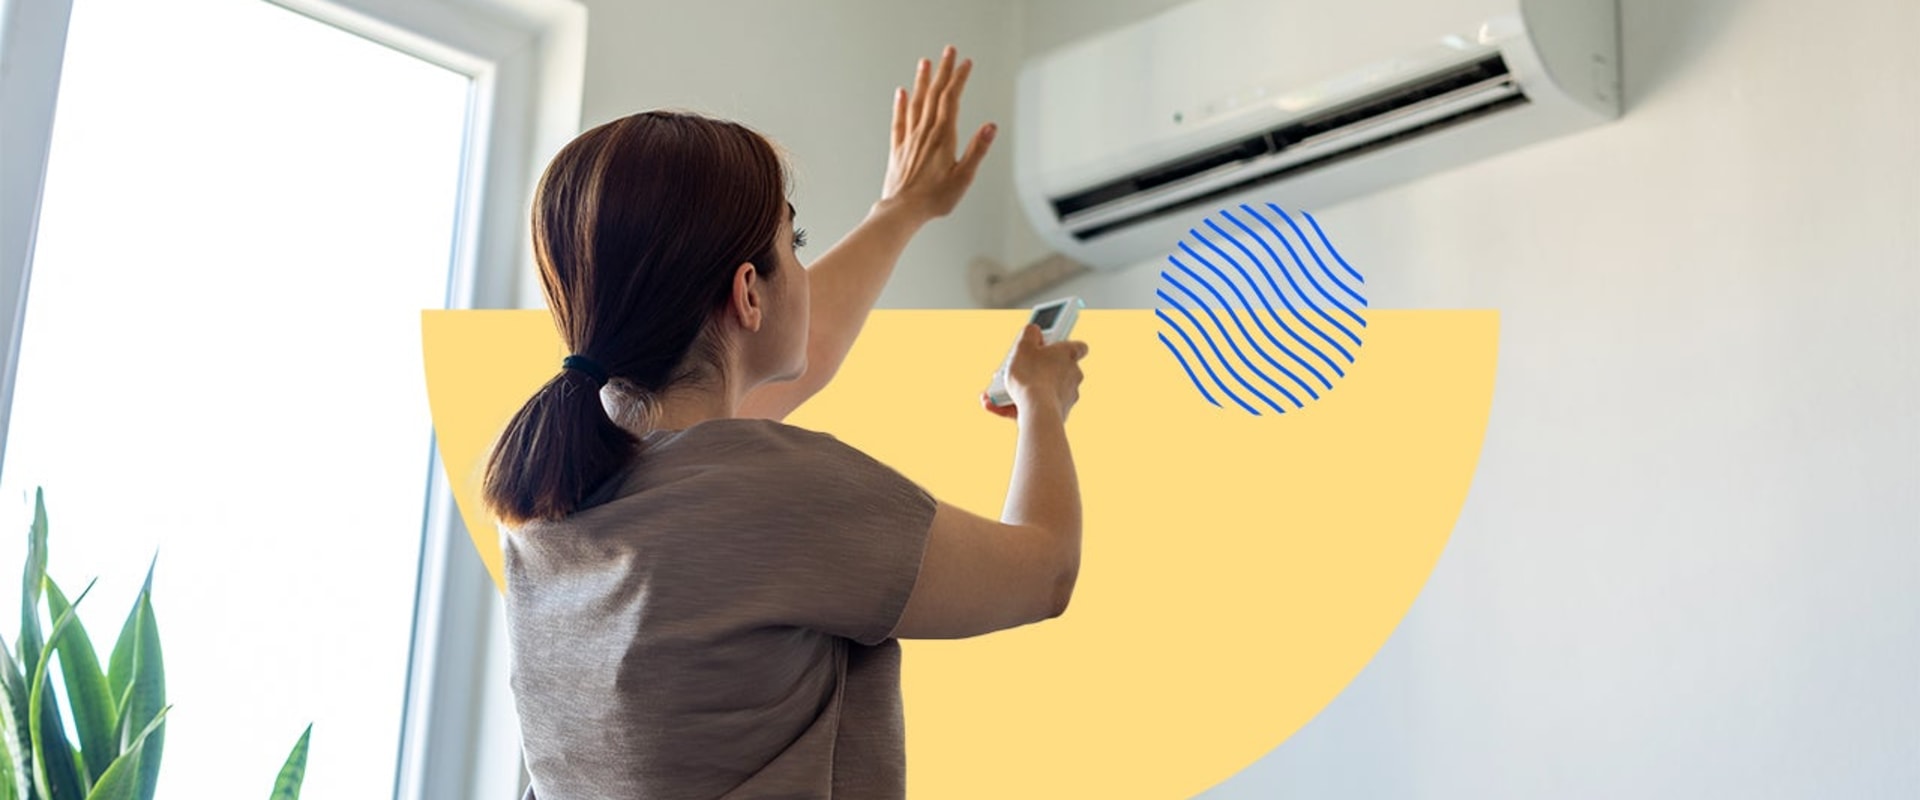 Maximizing Energy Savings with an HVAC Tune-Up in Florida